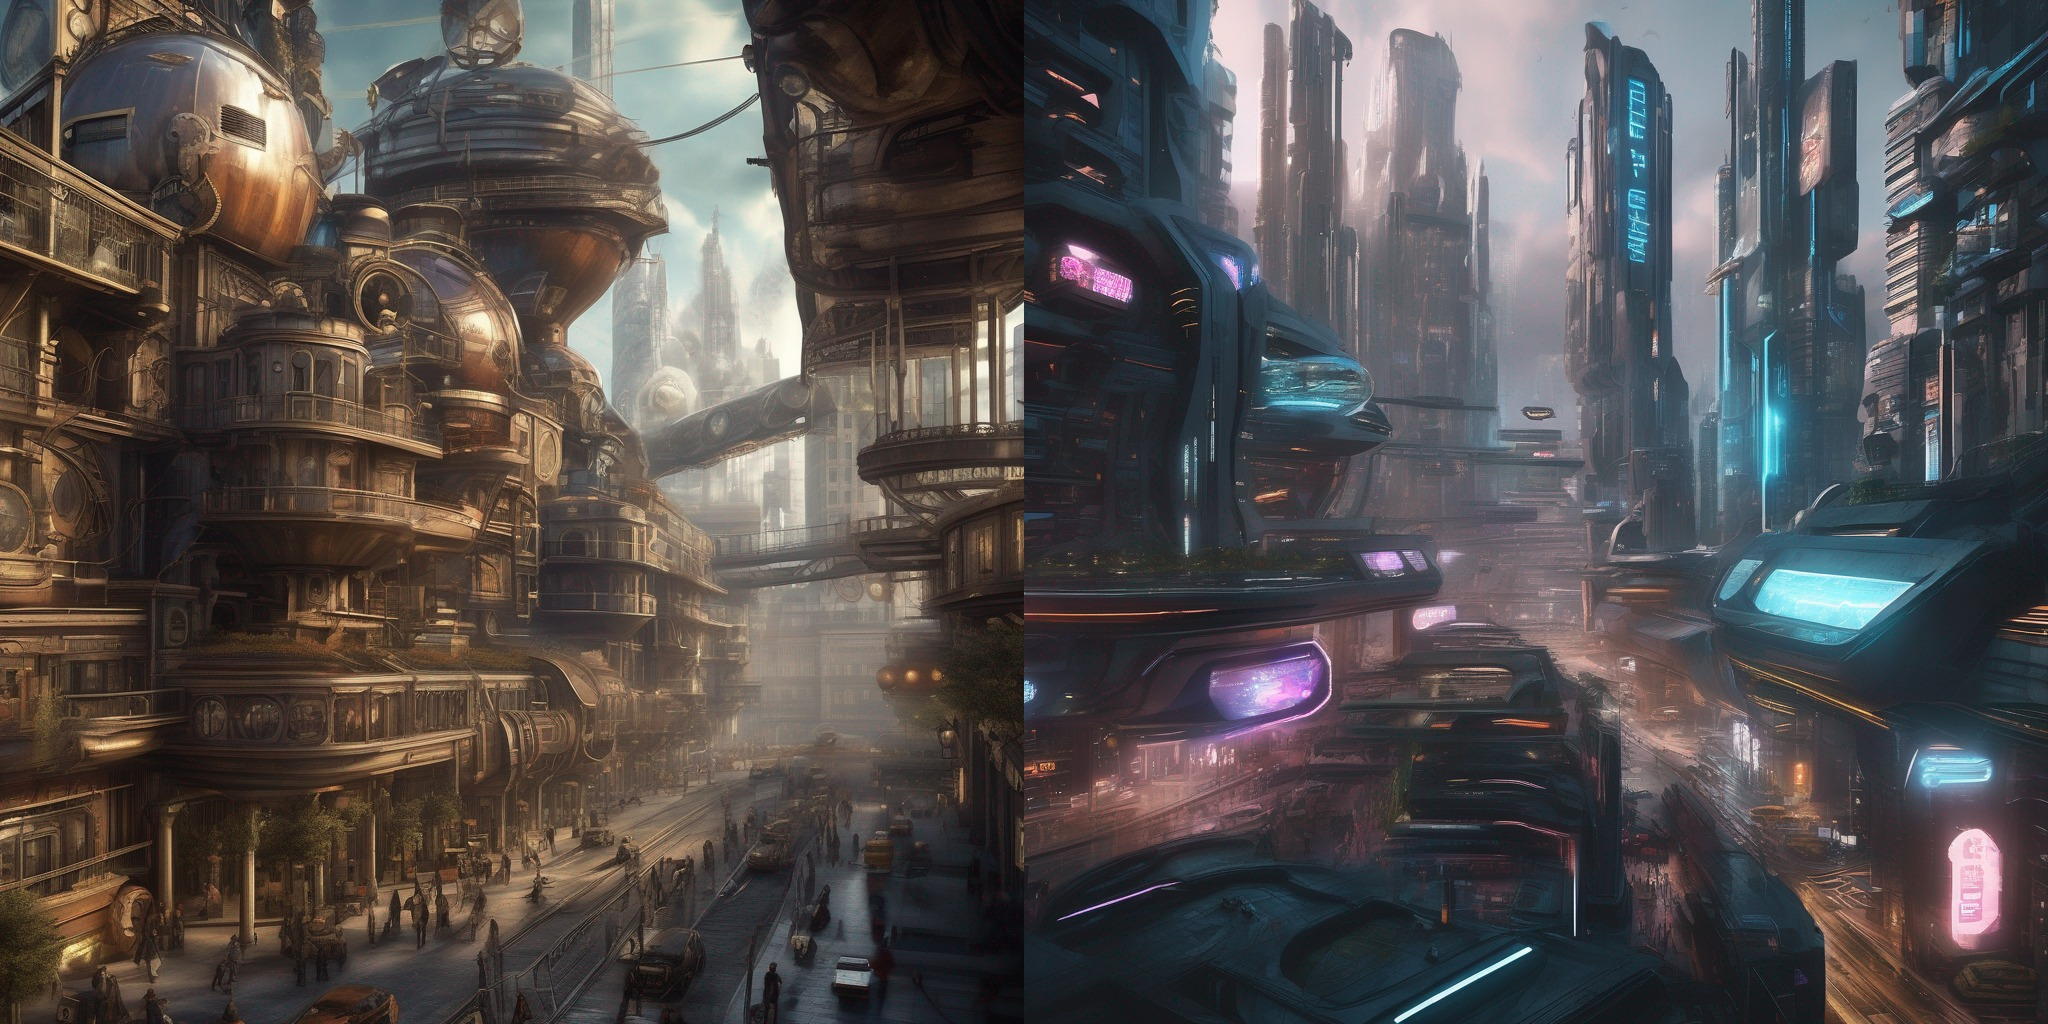 Futuristic cities in the style of steampunk and cyberpunk (generated by Stable Diffusion).